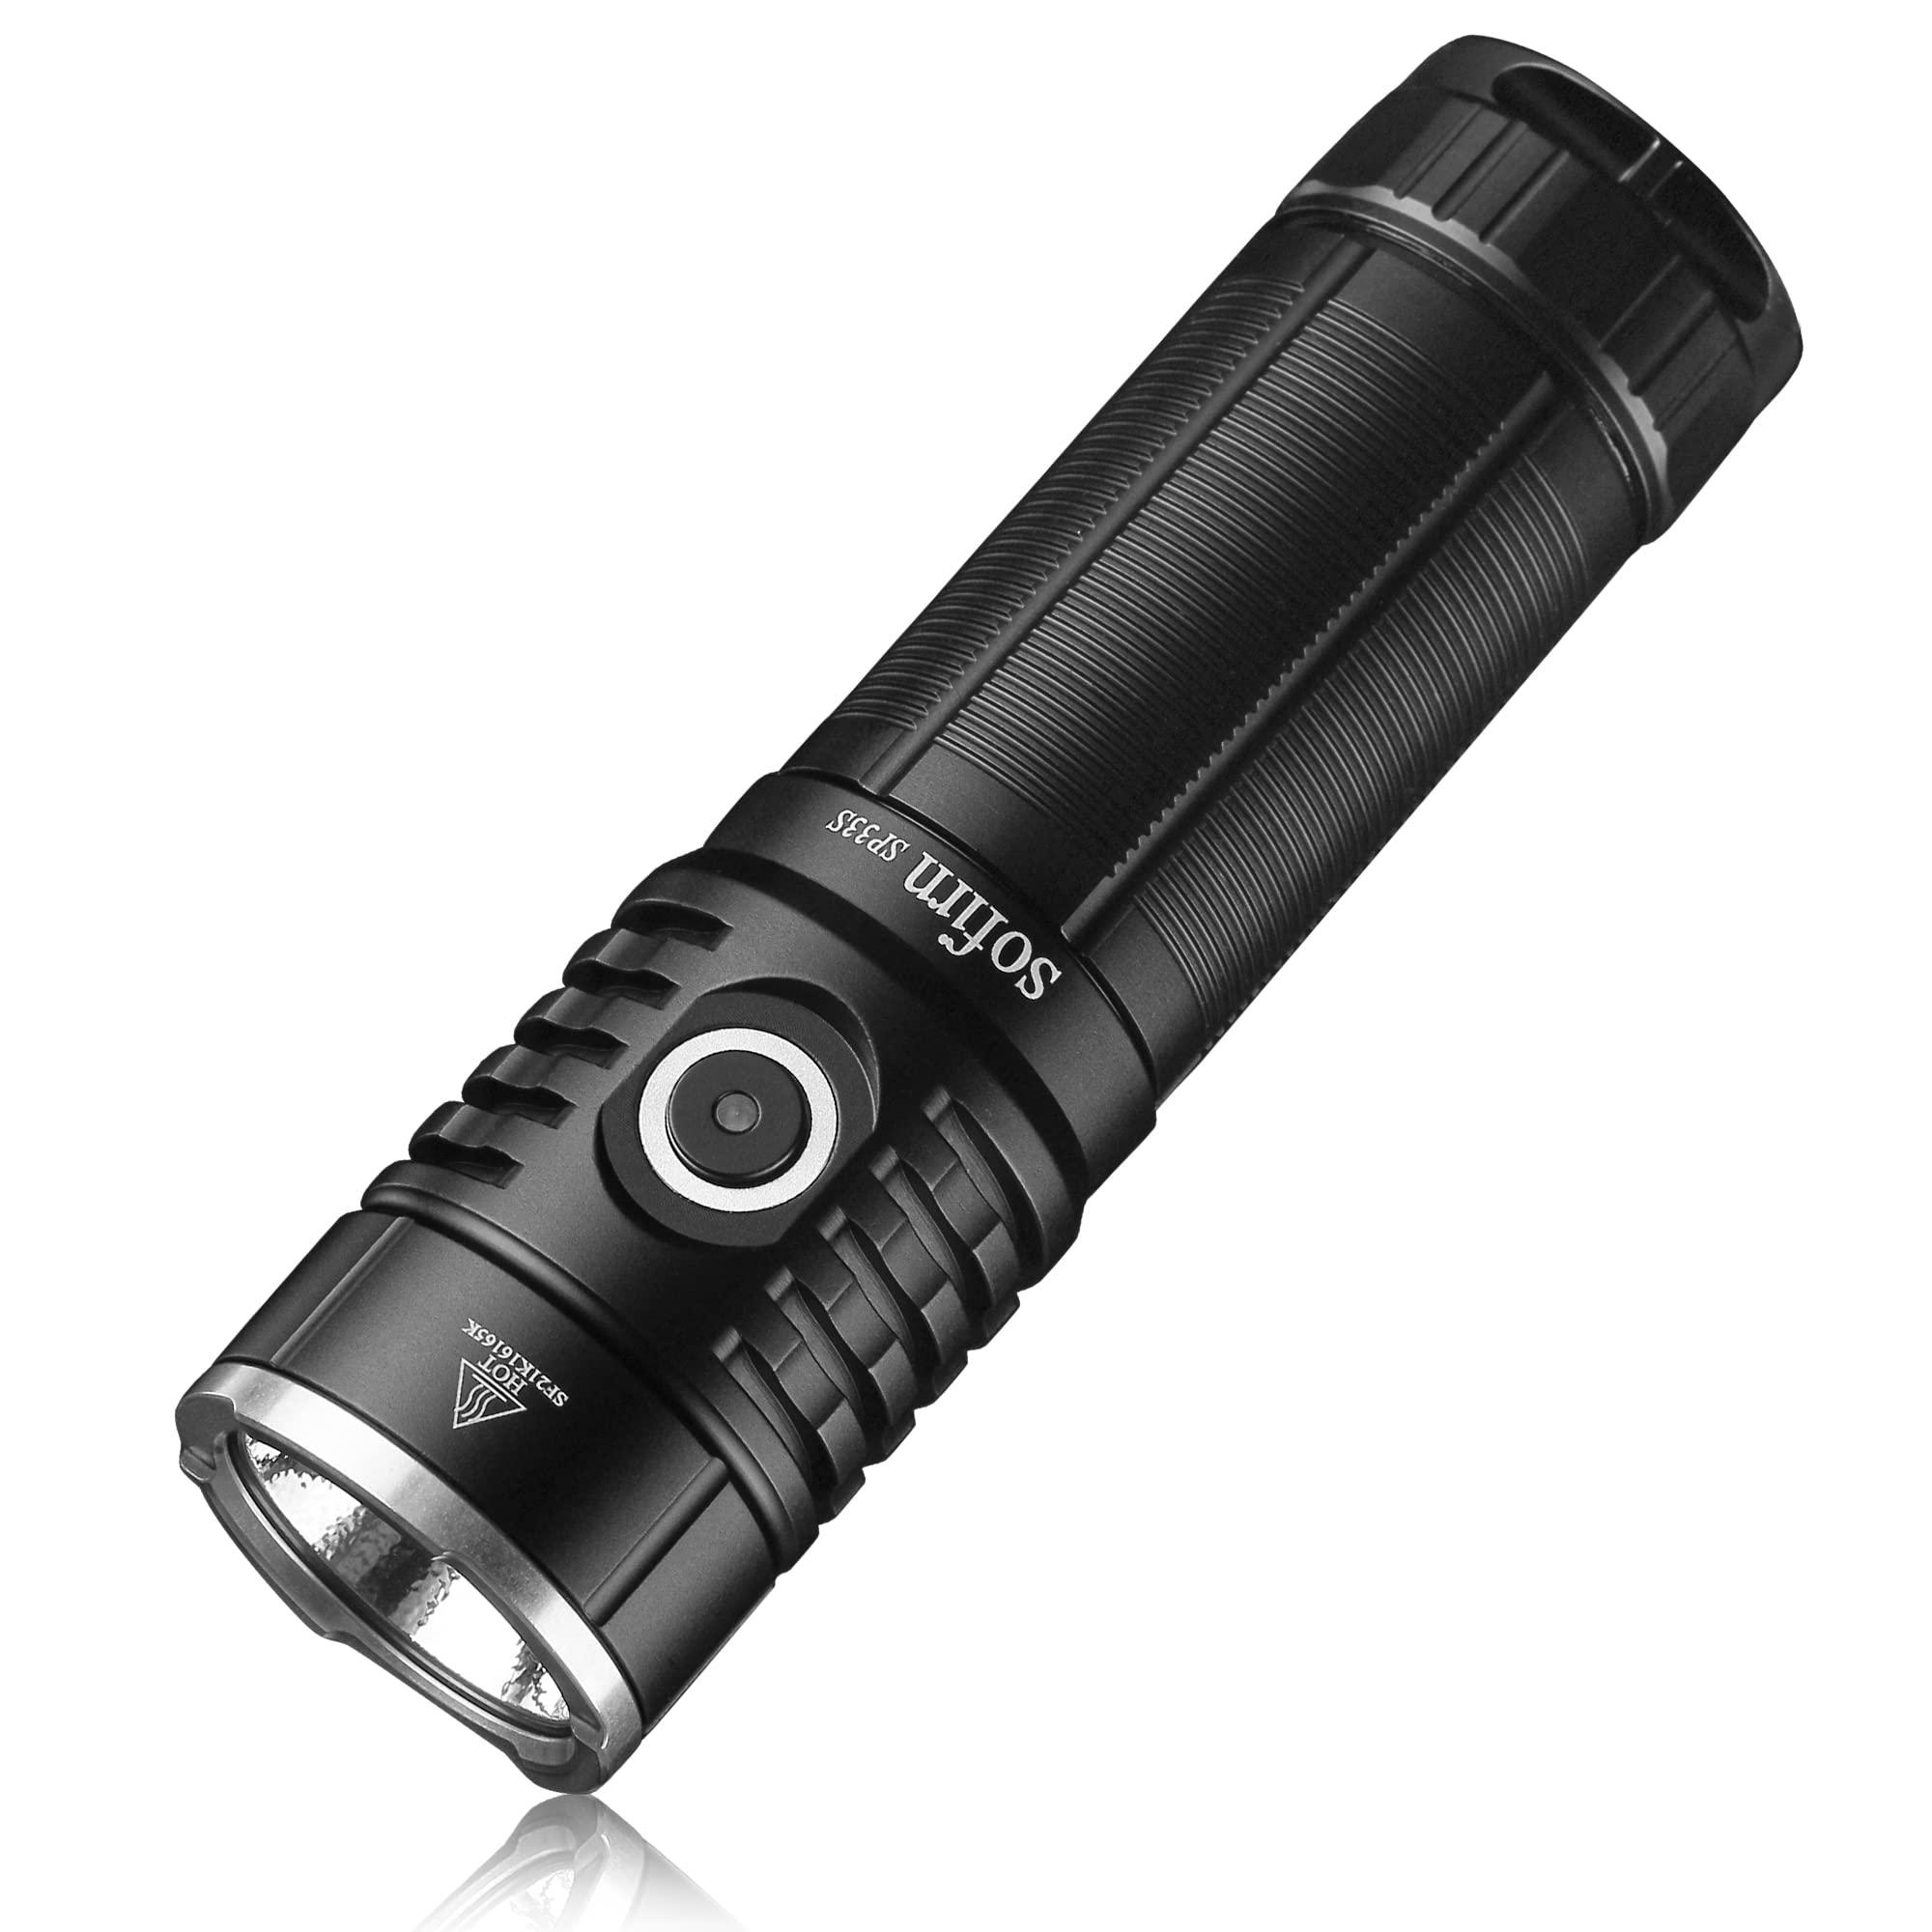 sofirn sp33s 5000 high lumens led flashlight rechargeable, super bright usbc edc flashlight with discharge function, high cap